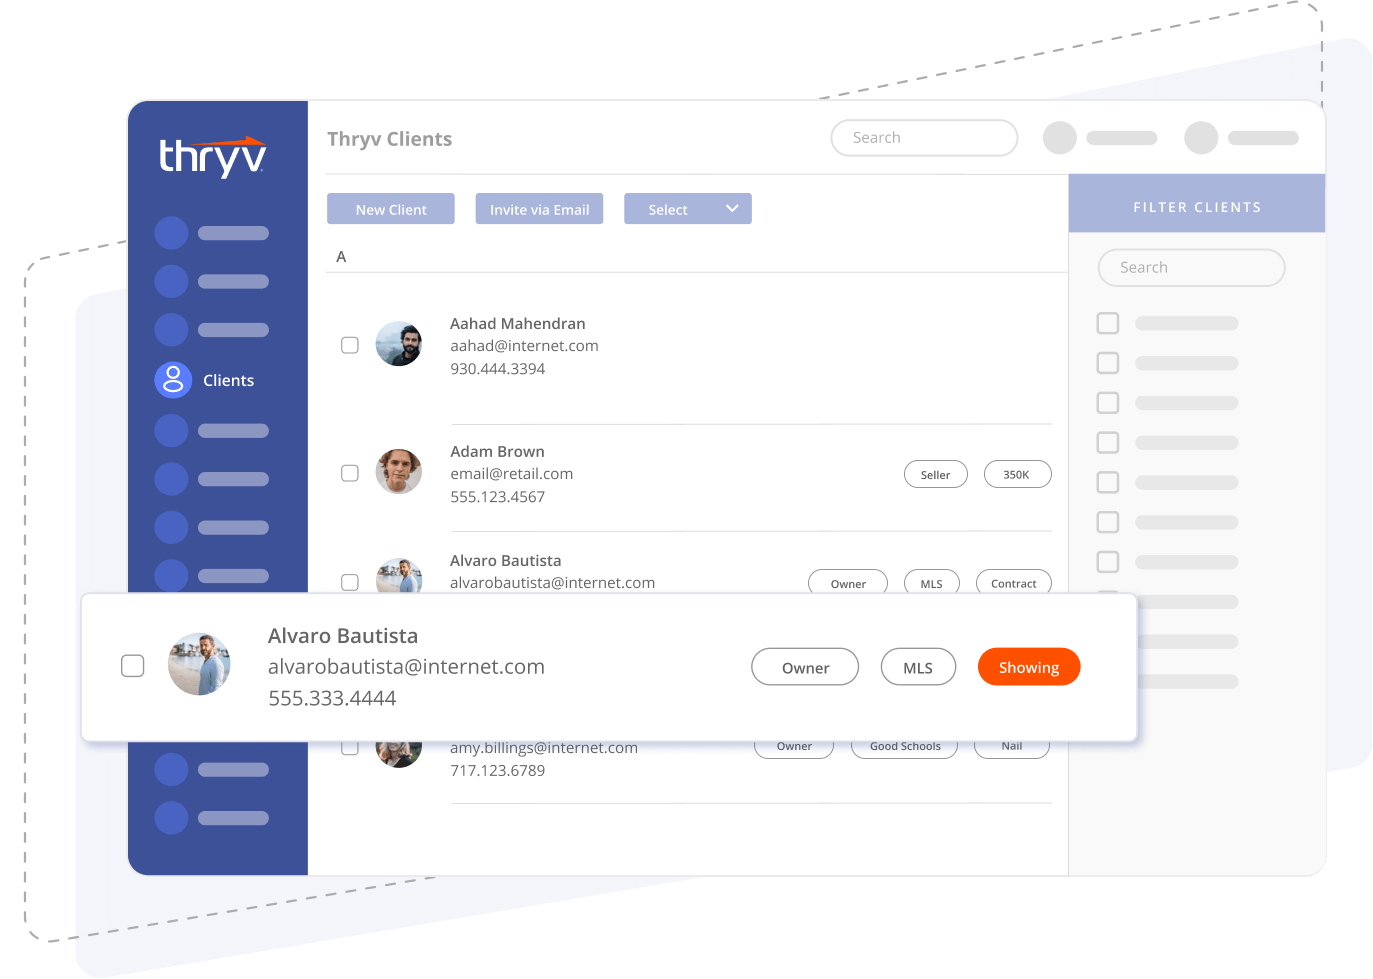 Searching real-estate customers you custom tags in Thryv